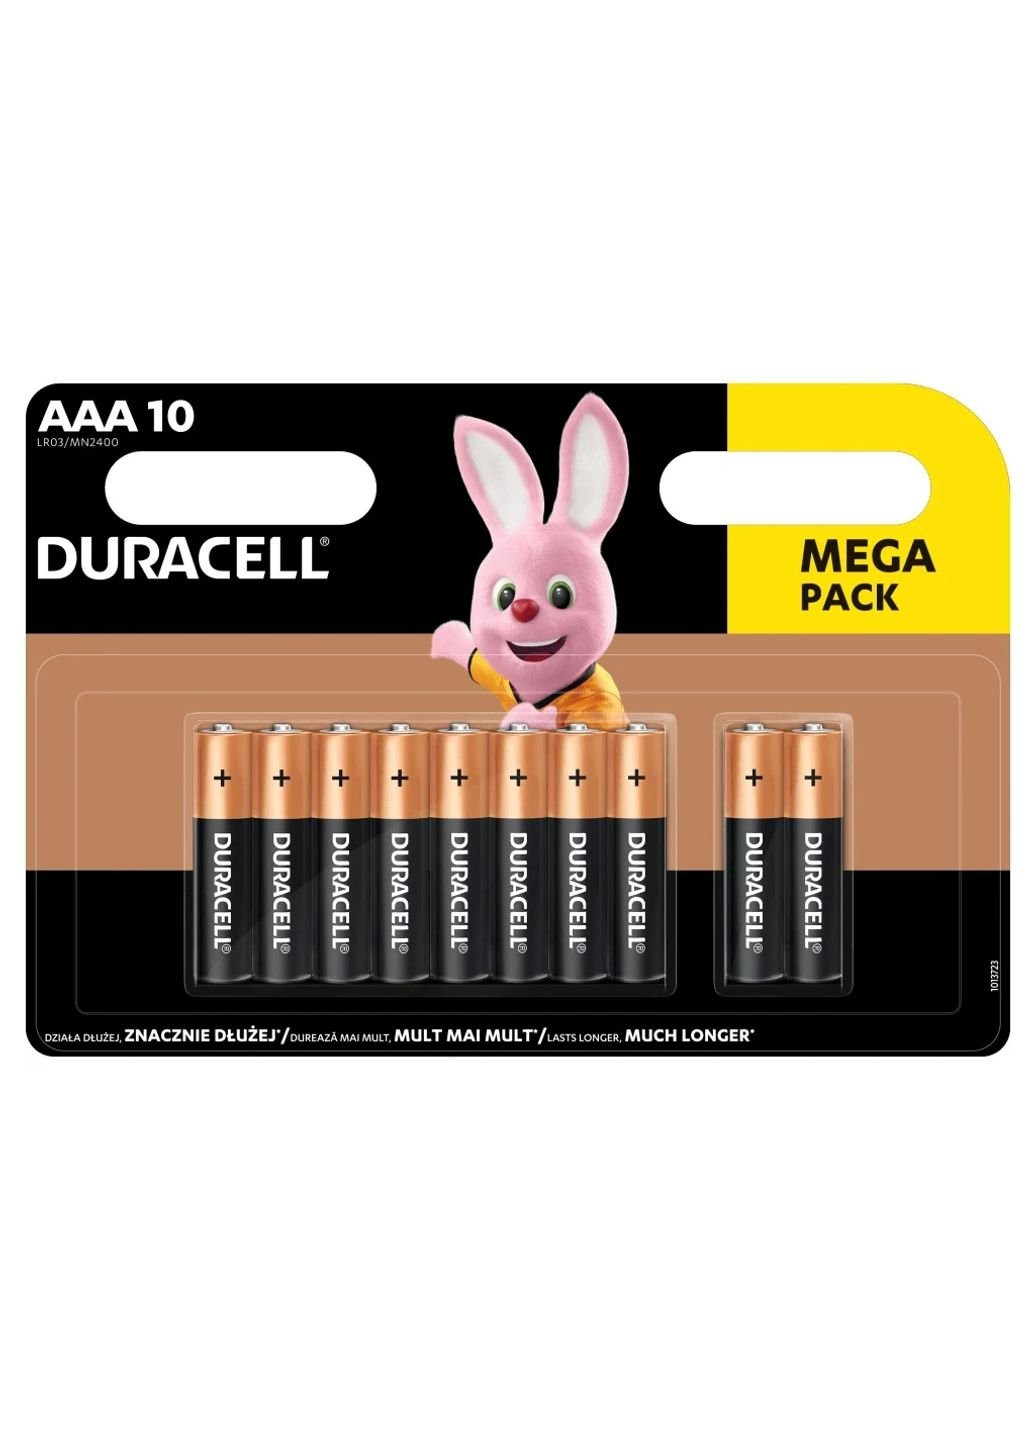 AAA MN2400 LR03 * 10 Акумулятор (5002509/5006462) Duracell (251411867)